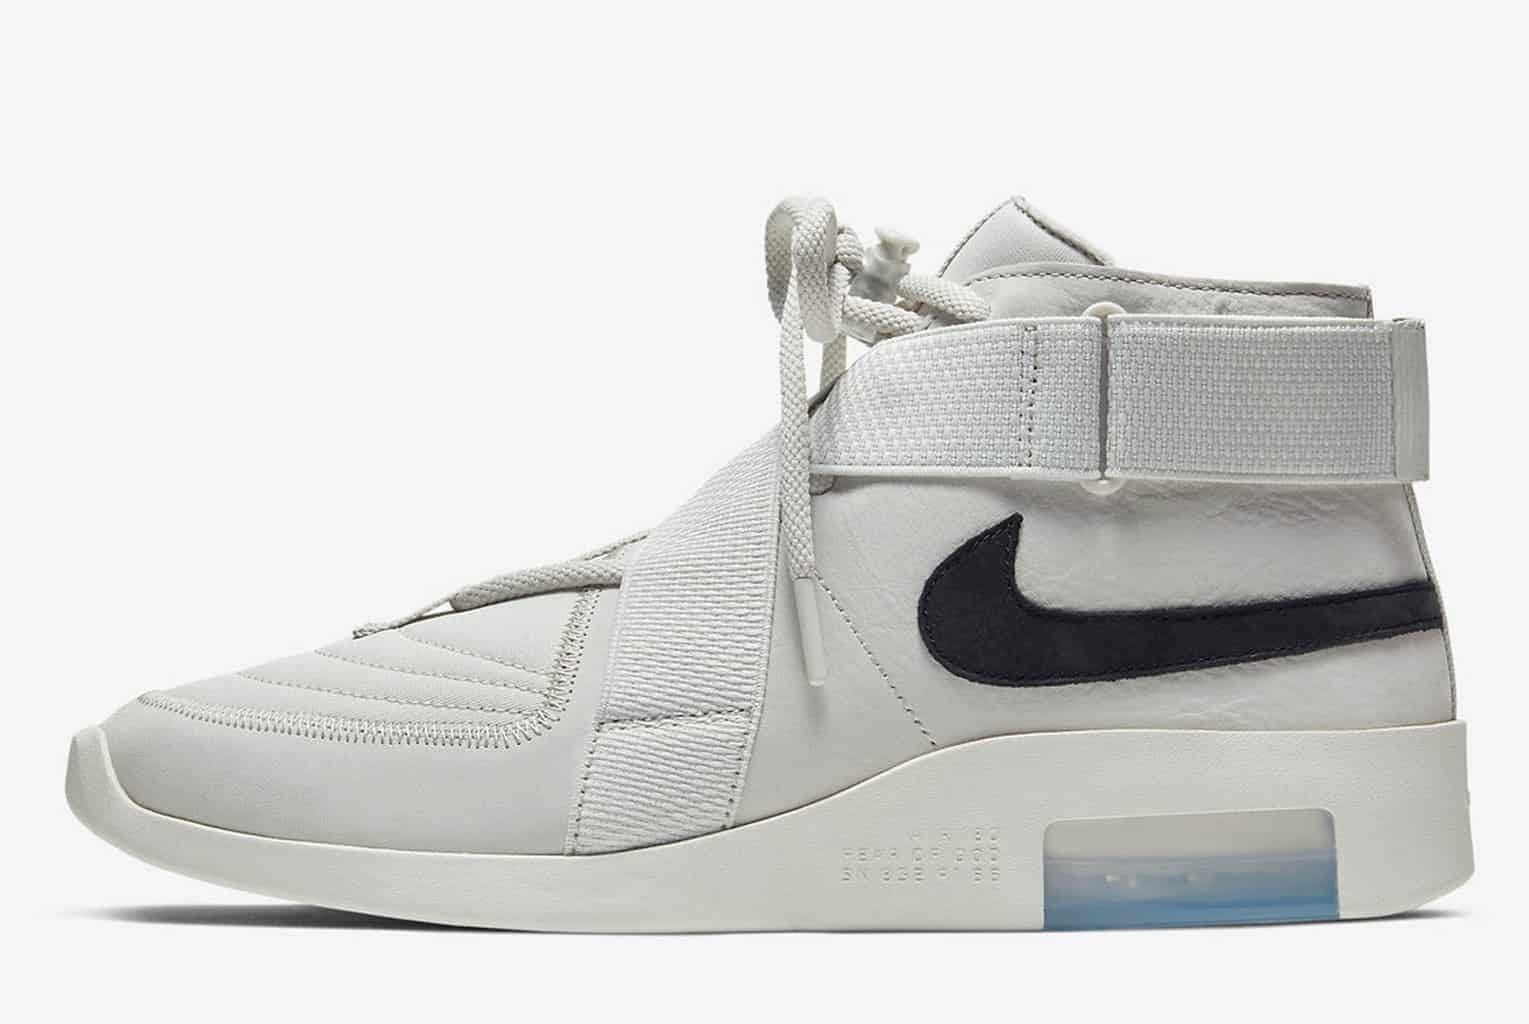 Official Look at the Upcoming Nike Air Fear of God 180 “Light Bone”